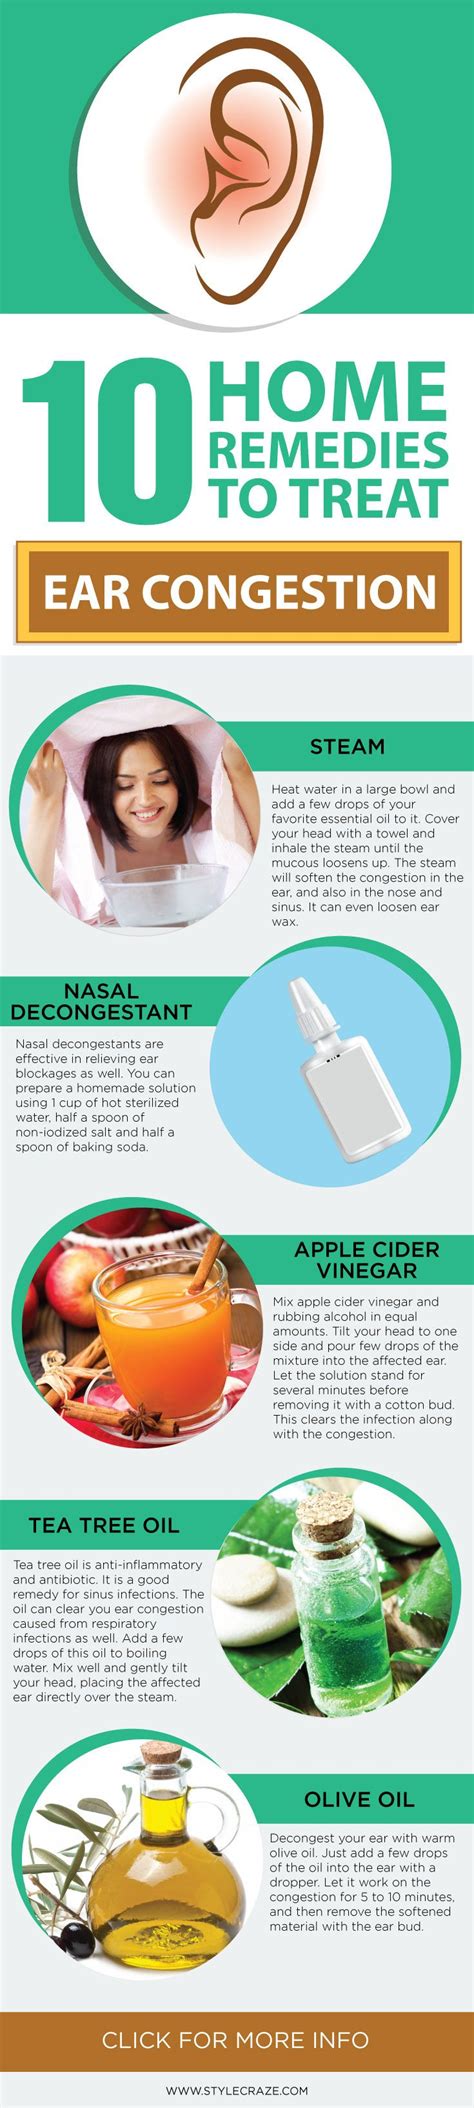 9 Home Remedies For Clogged Ears Natural Cough Remedies Home